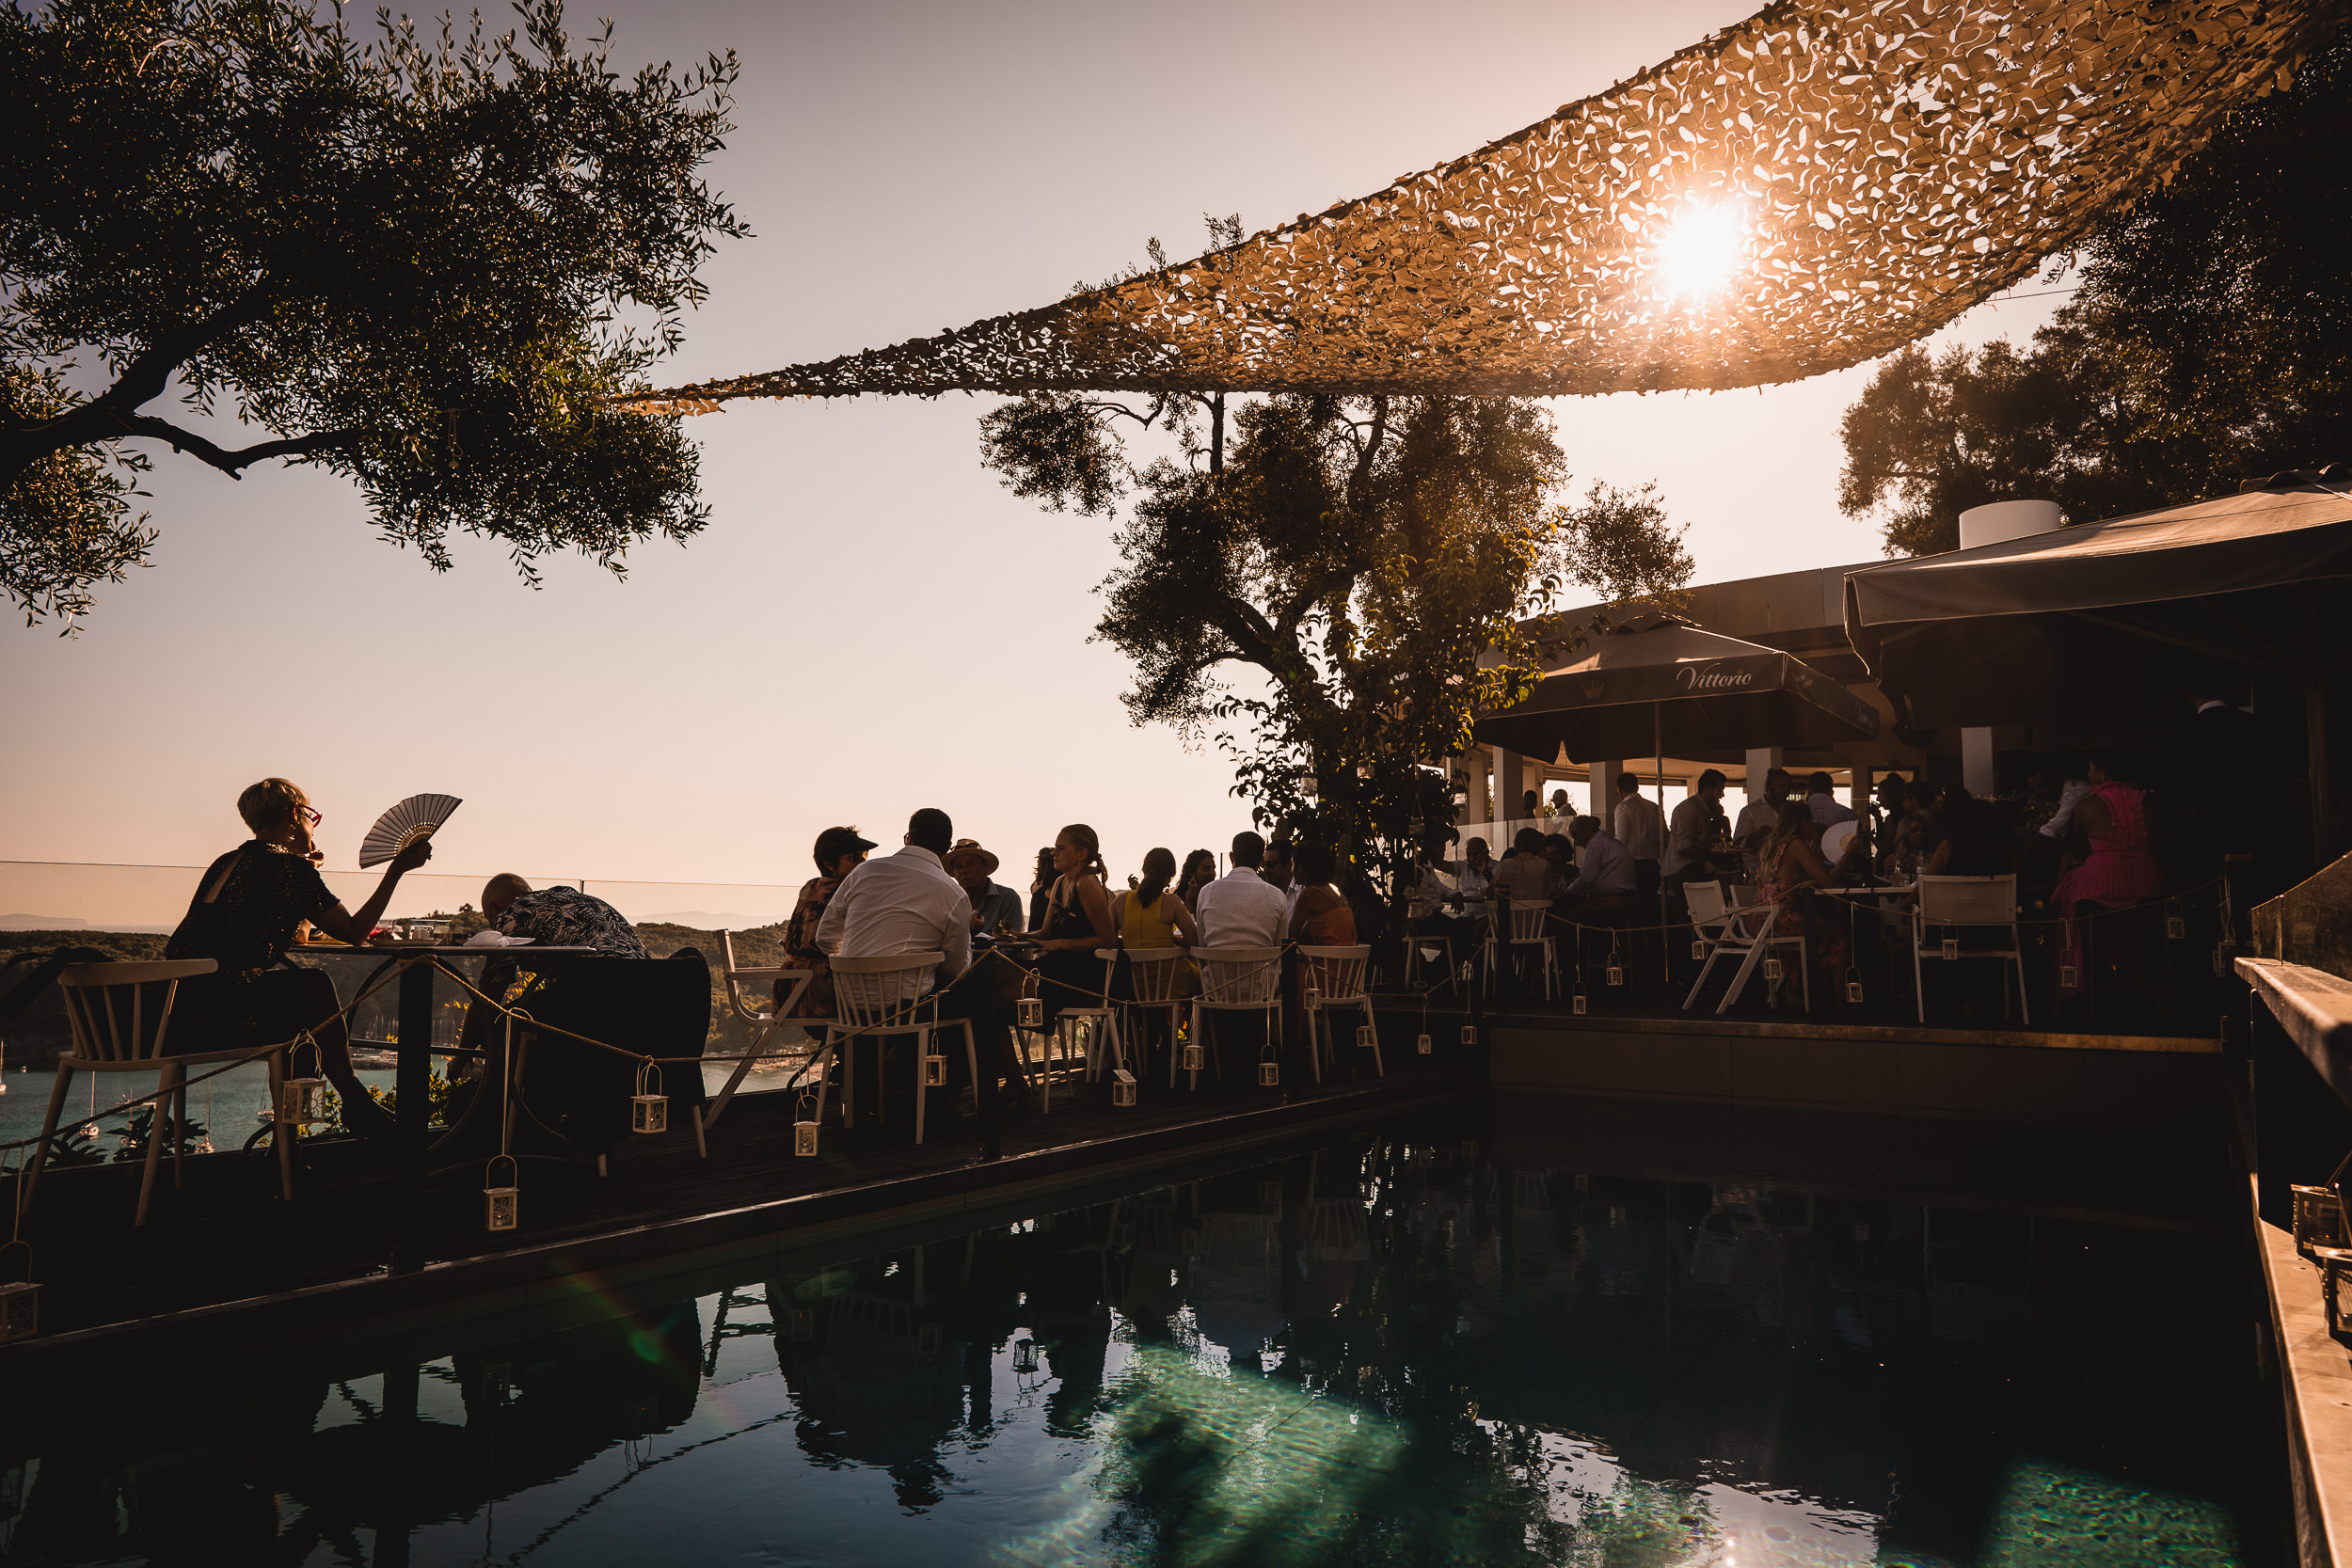 A group of people sitting around a pool at sunset, celebrating the groom's wedding.